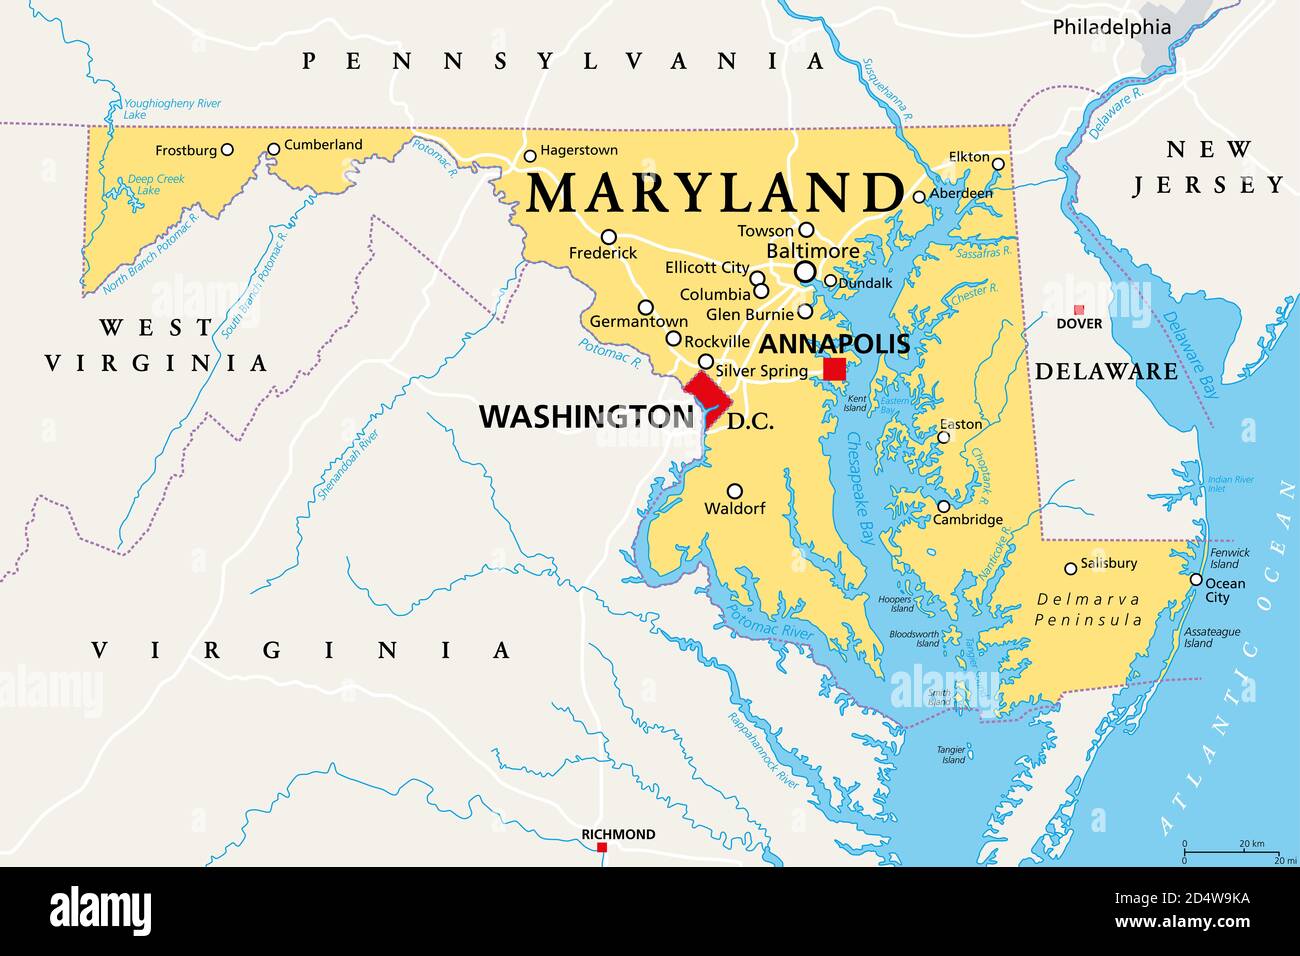 Maryland, MD, political map. State in the Mid-Atlantic region of the United States of America. Capital Annapolis. Old Line State. Free State. Stock Photo